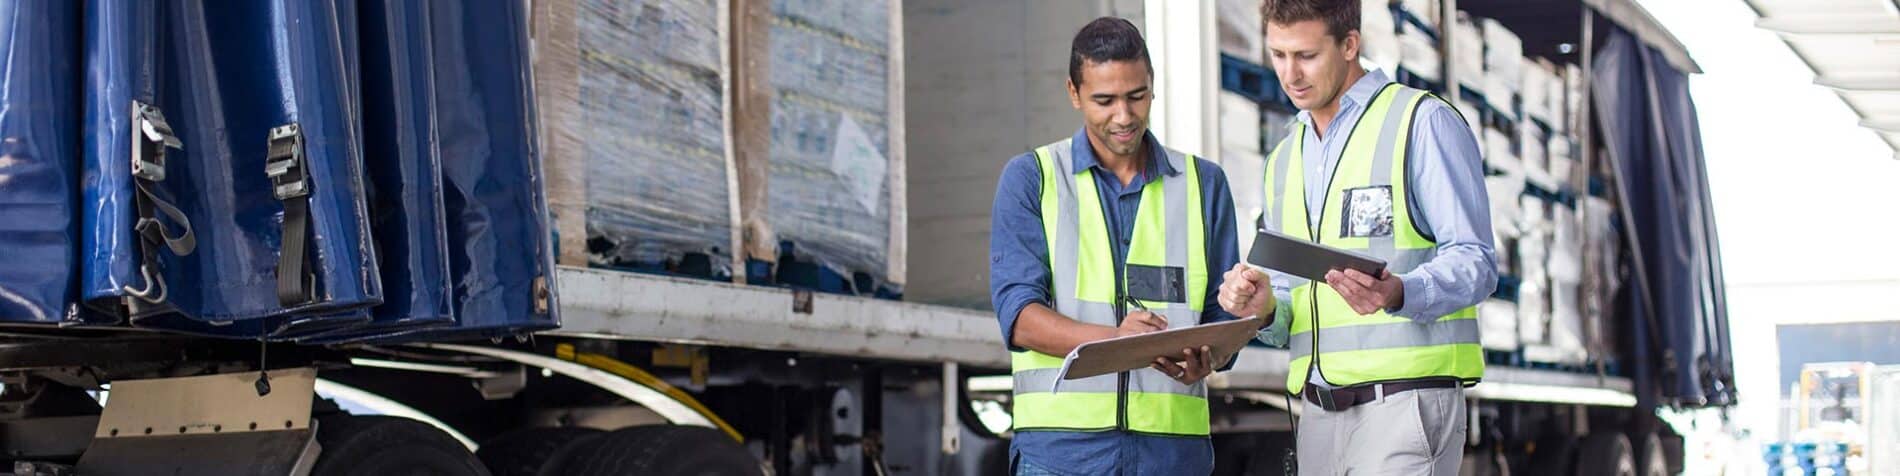 Identifying and Maximizing Logistics Capacity in Times of Disruption